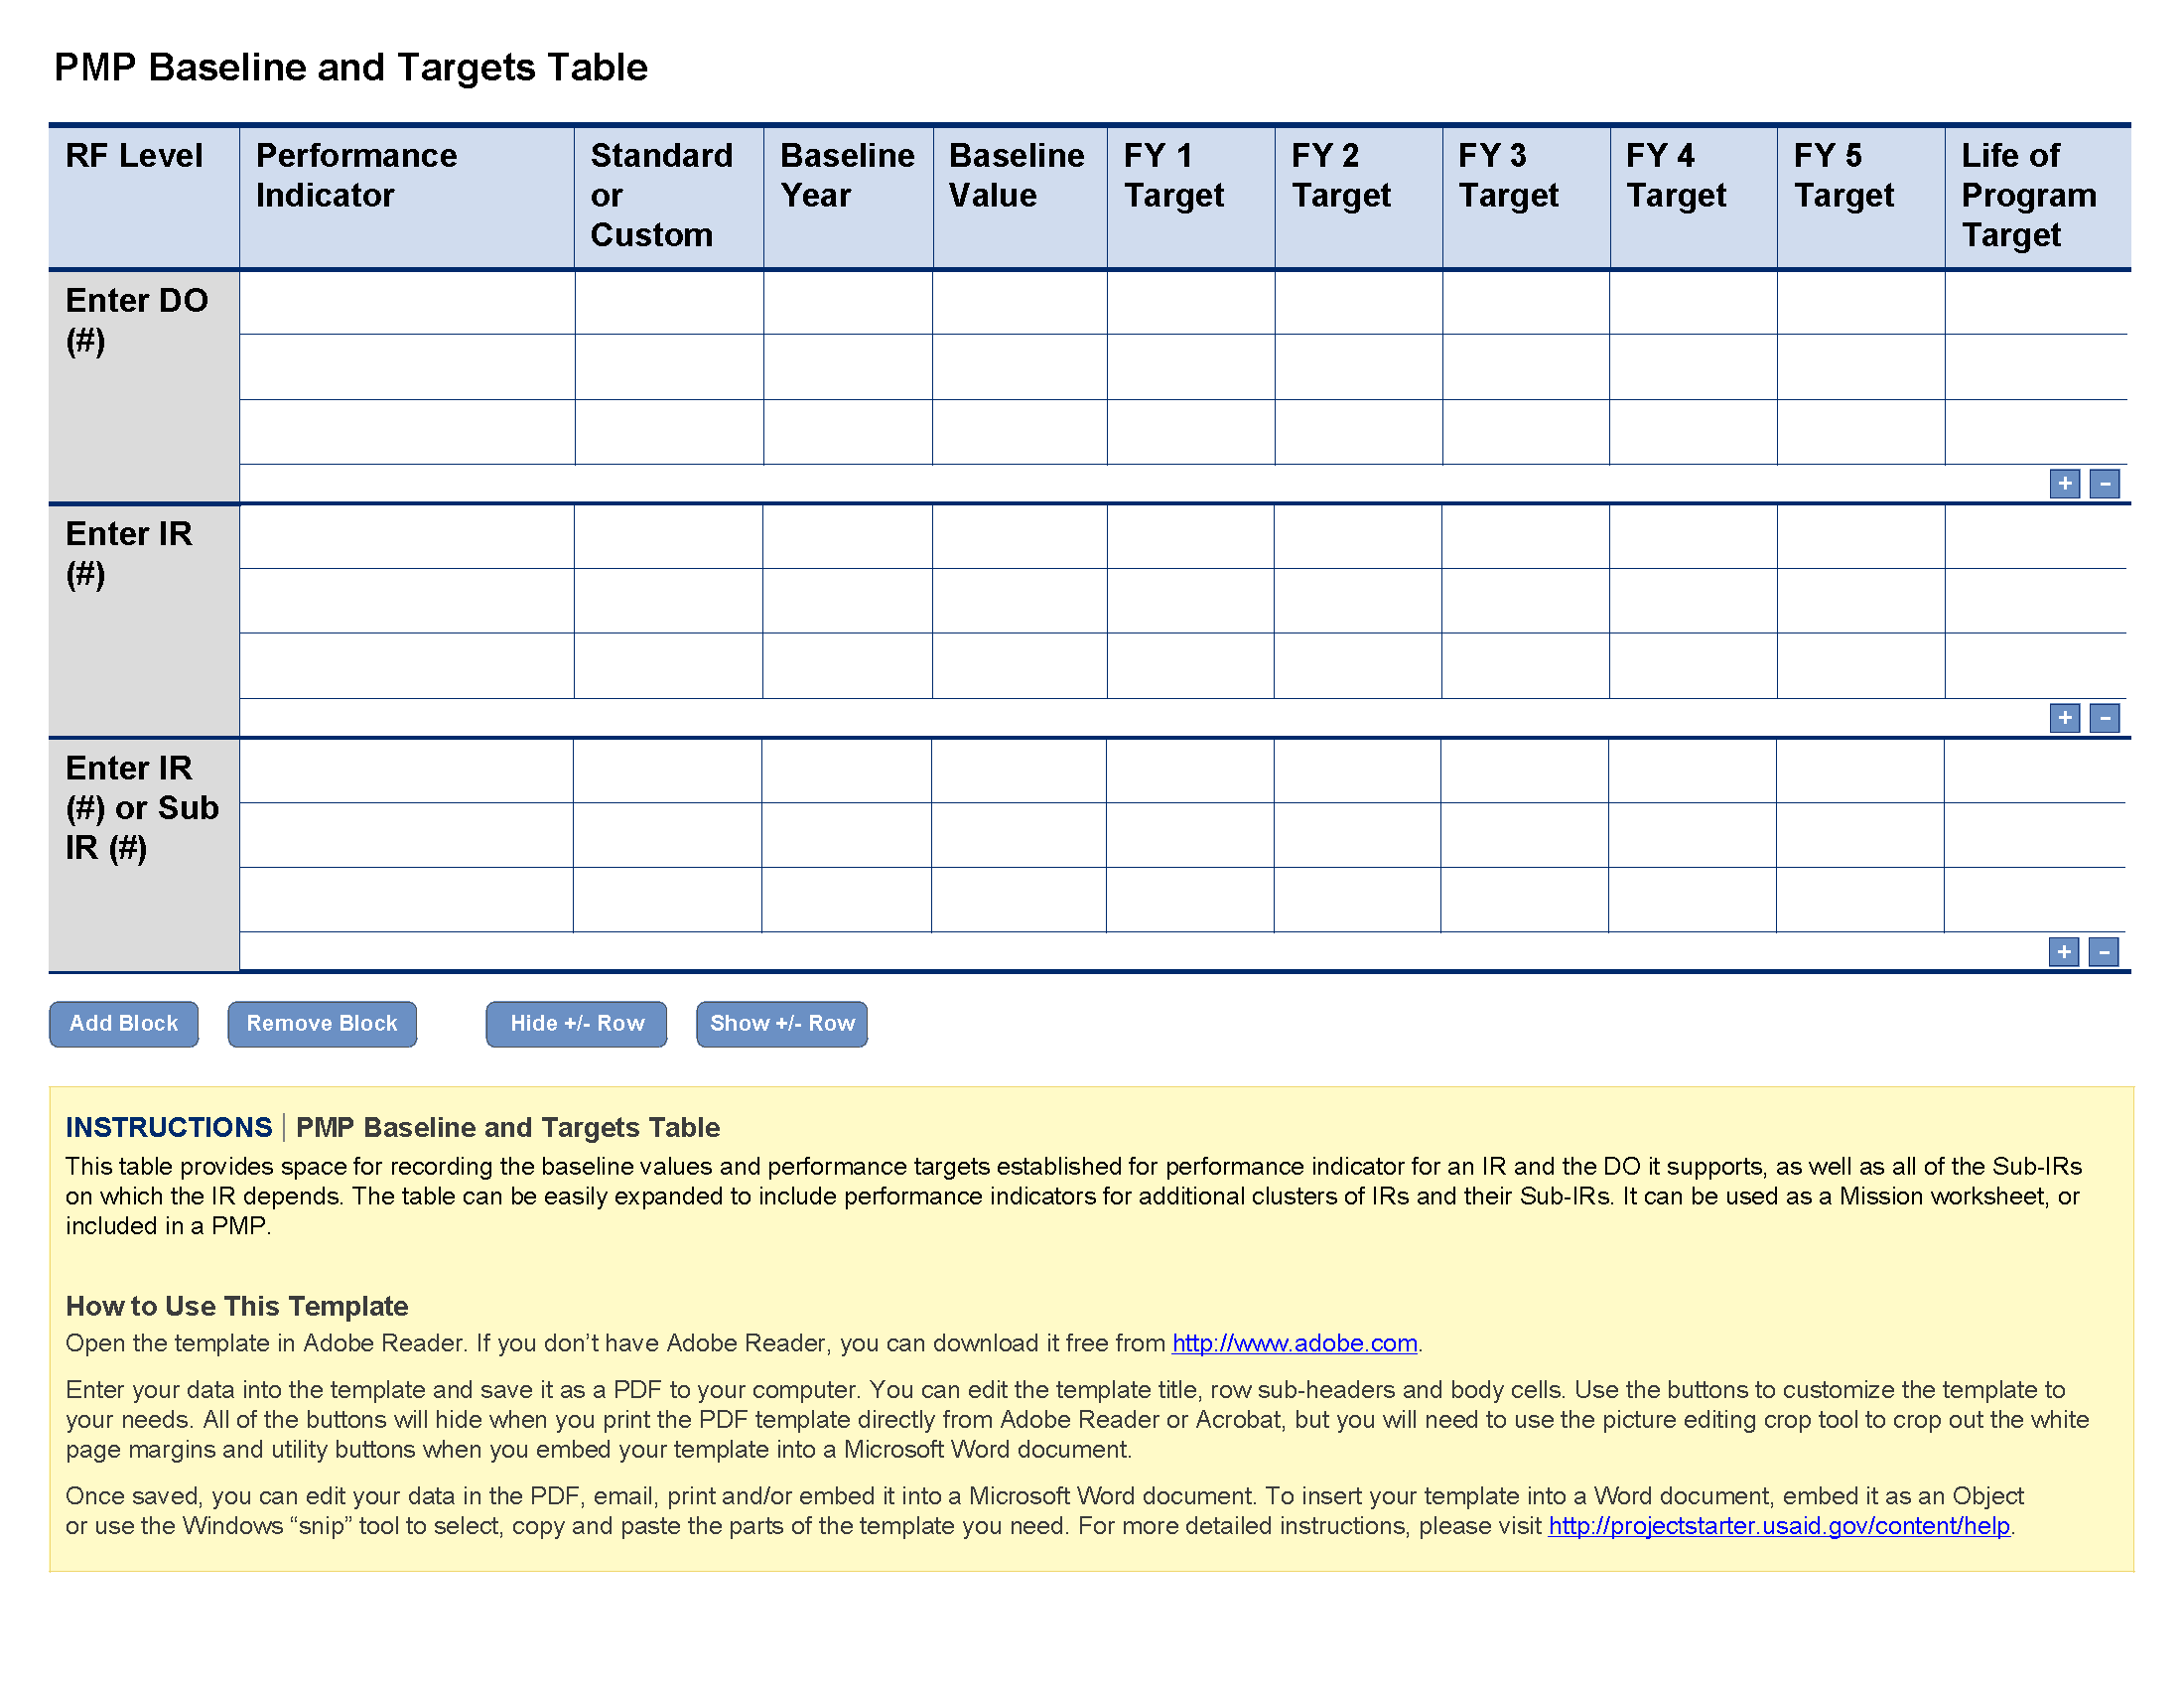 PMP Baseline and Targets Template | Project Starter — USAID